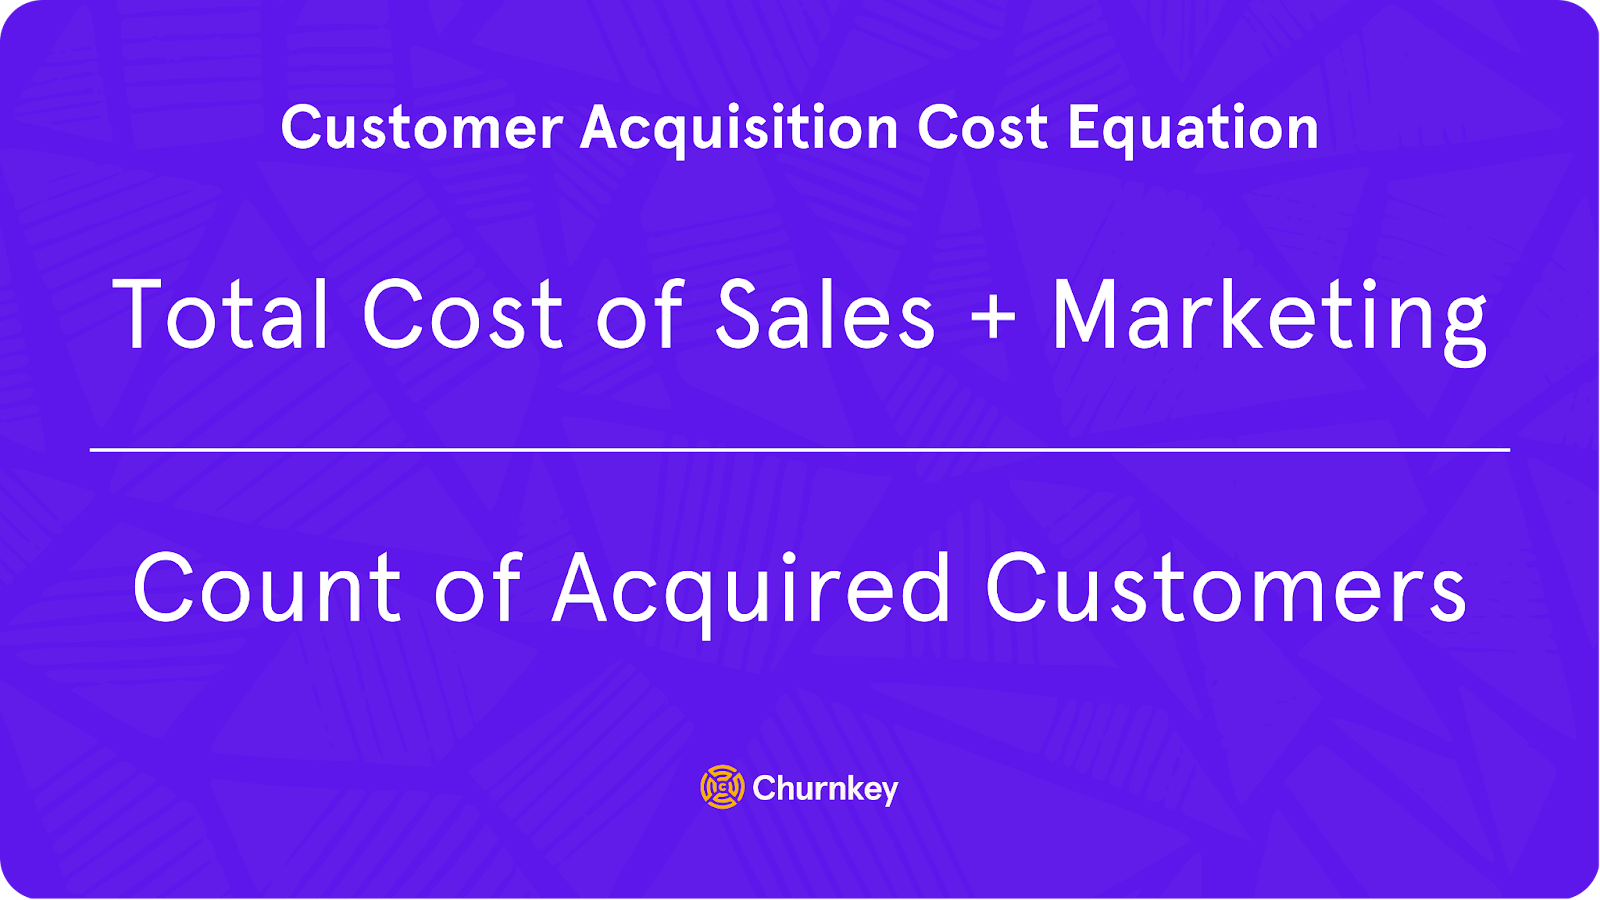 How to Calculate and Increase Your Customer Lifetime Value